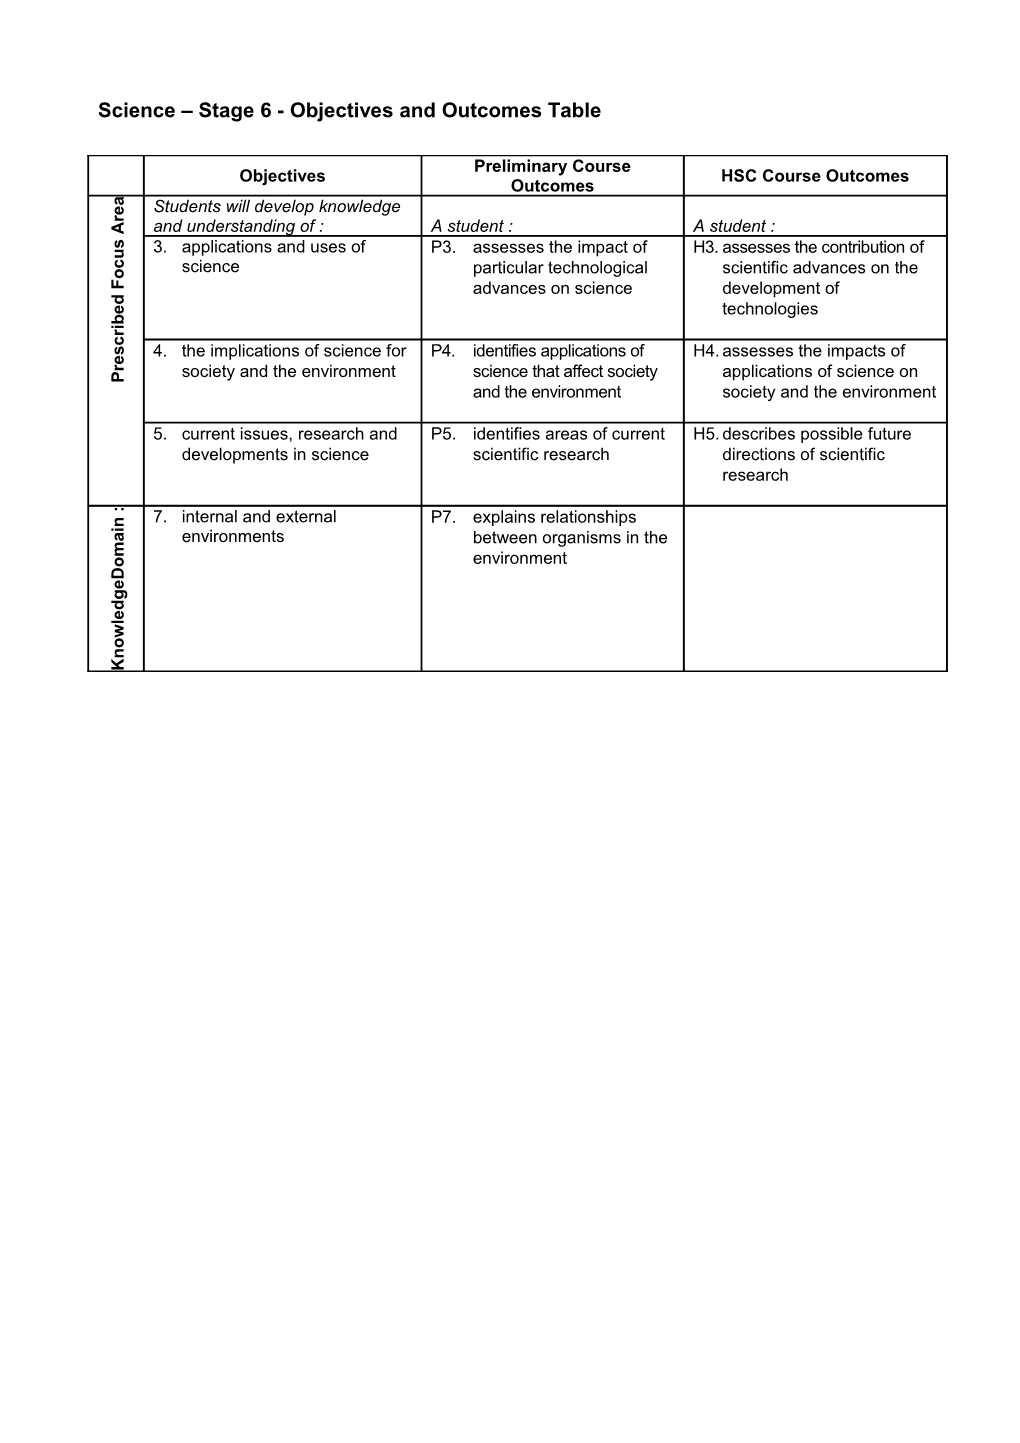 Science Stage 6 - Objectives and Outcomes Table